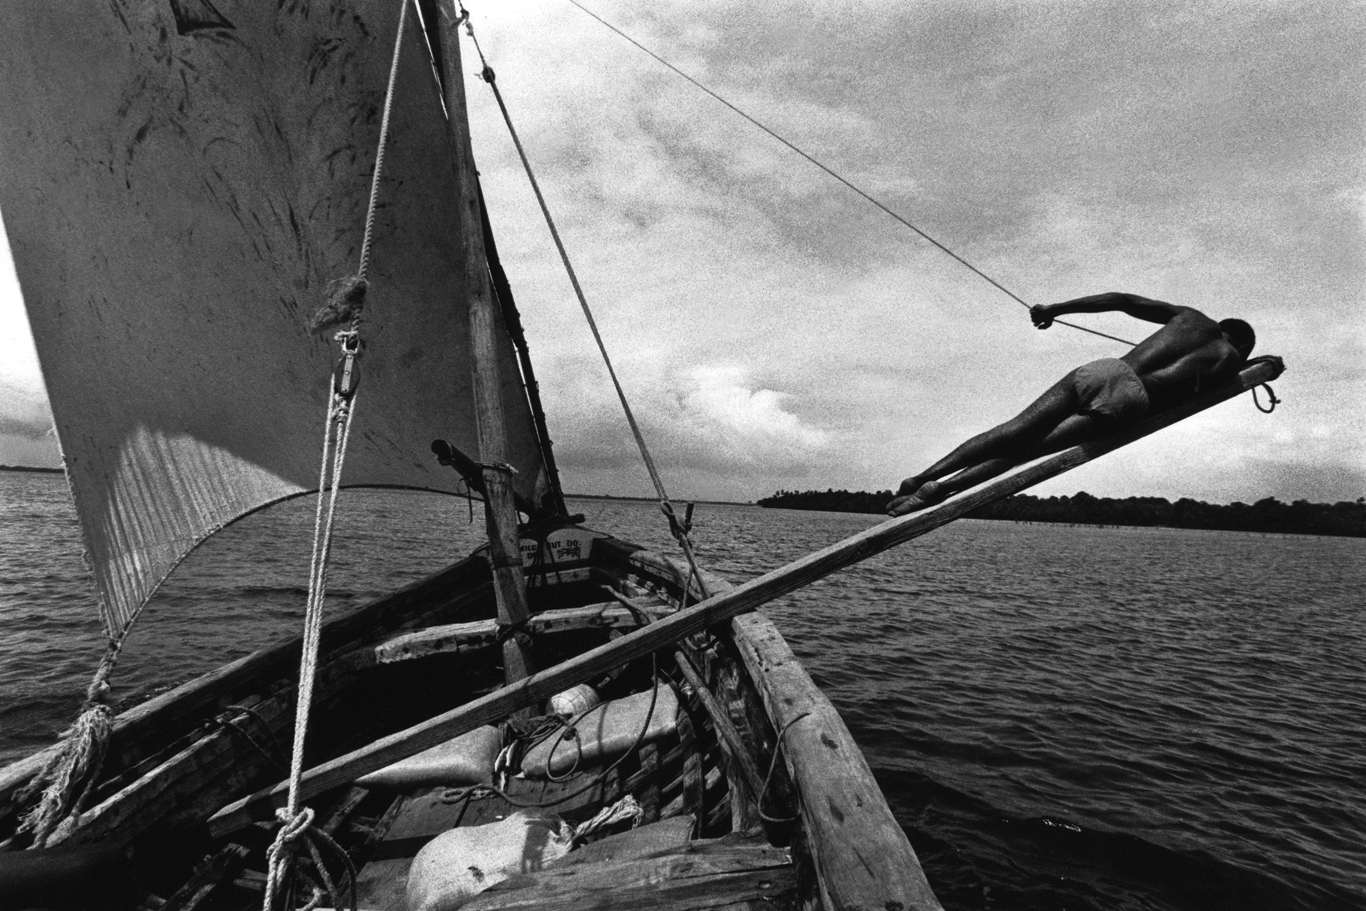  ‘Trapeze’ A sailor upon the trapeze off the coast of Mombasa, Kenya. 1999  